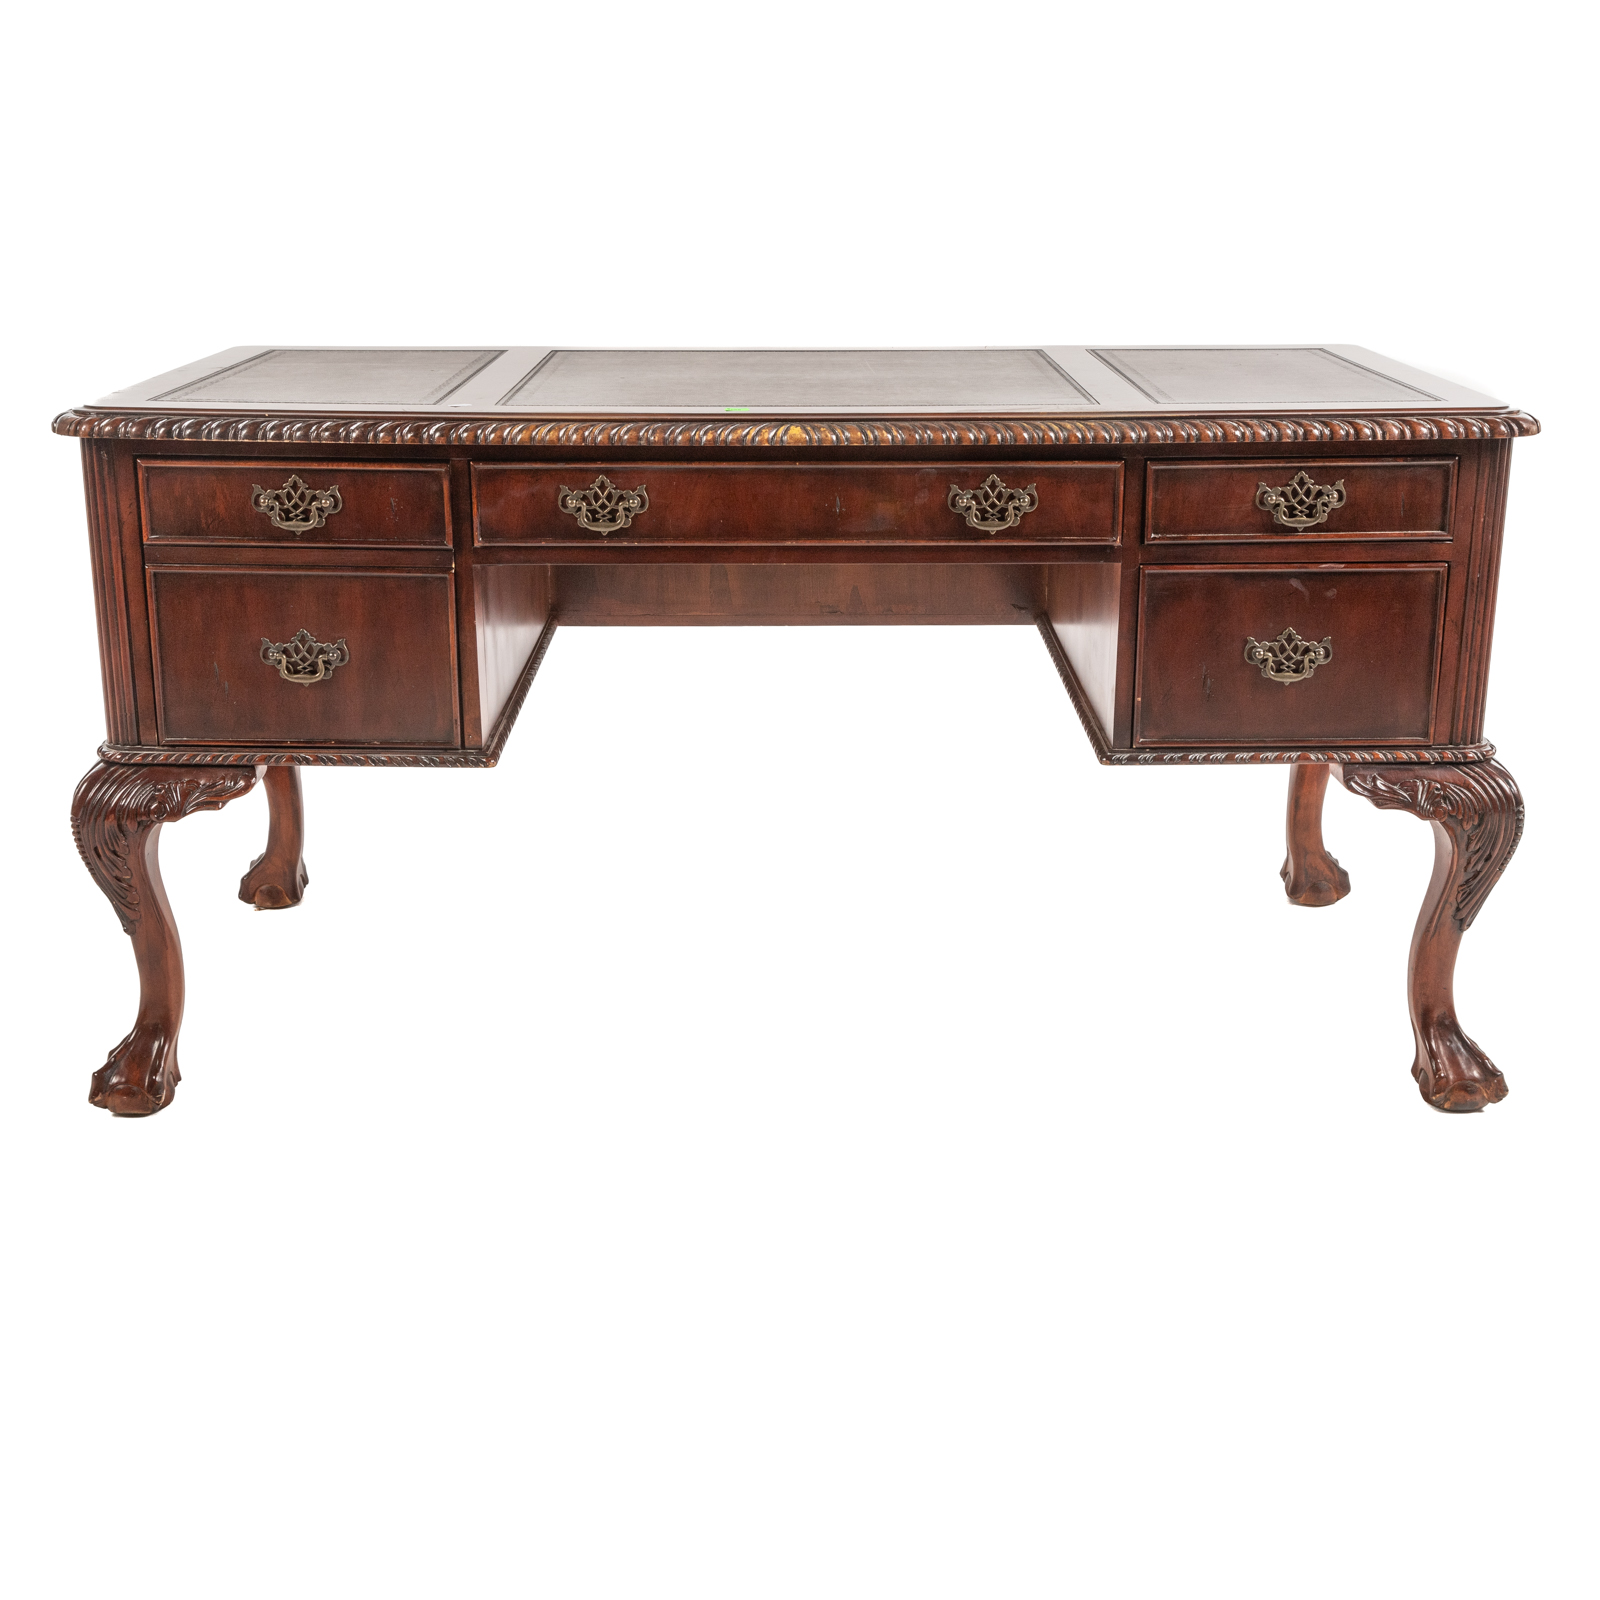 HOOKER CHIPPENDALE STYLE DESK 20th 3cae58